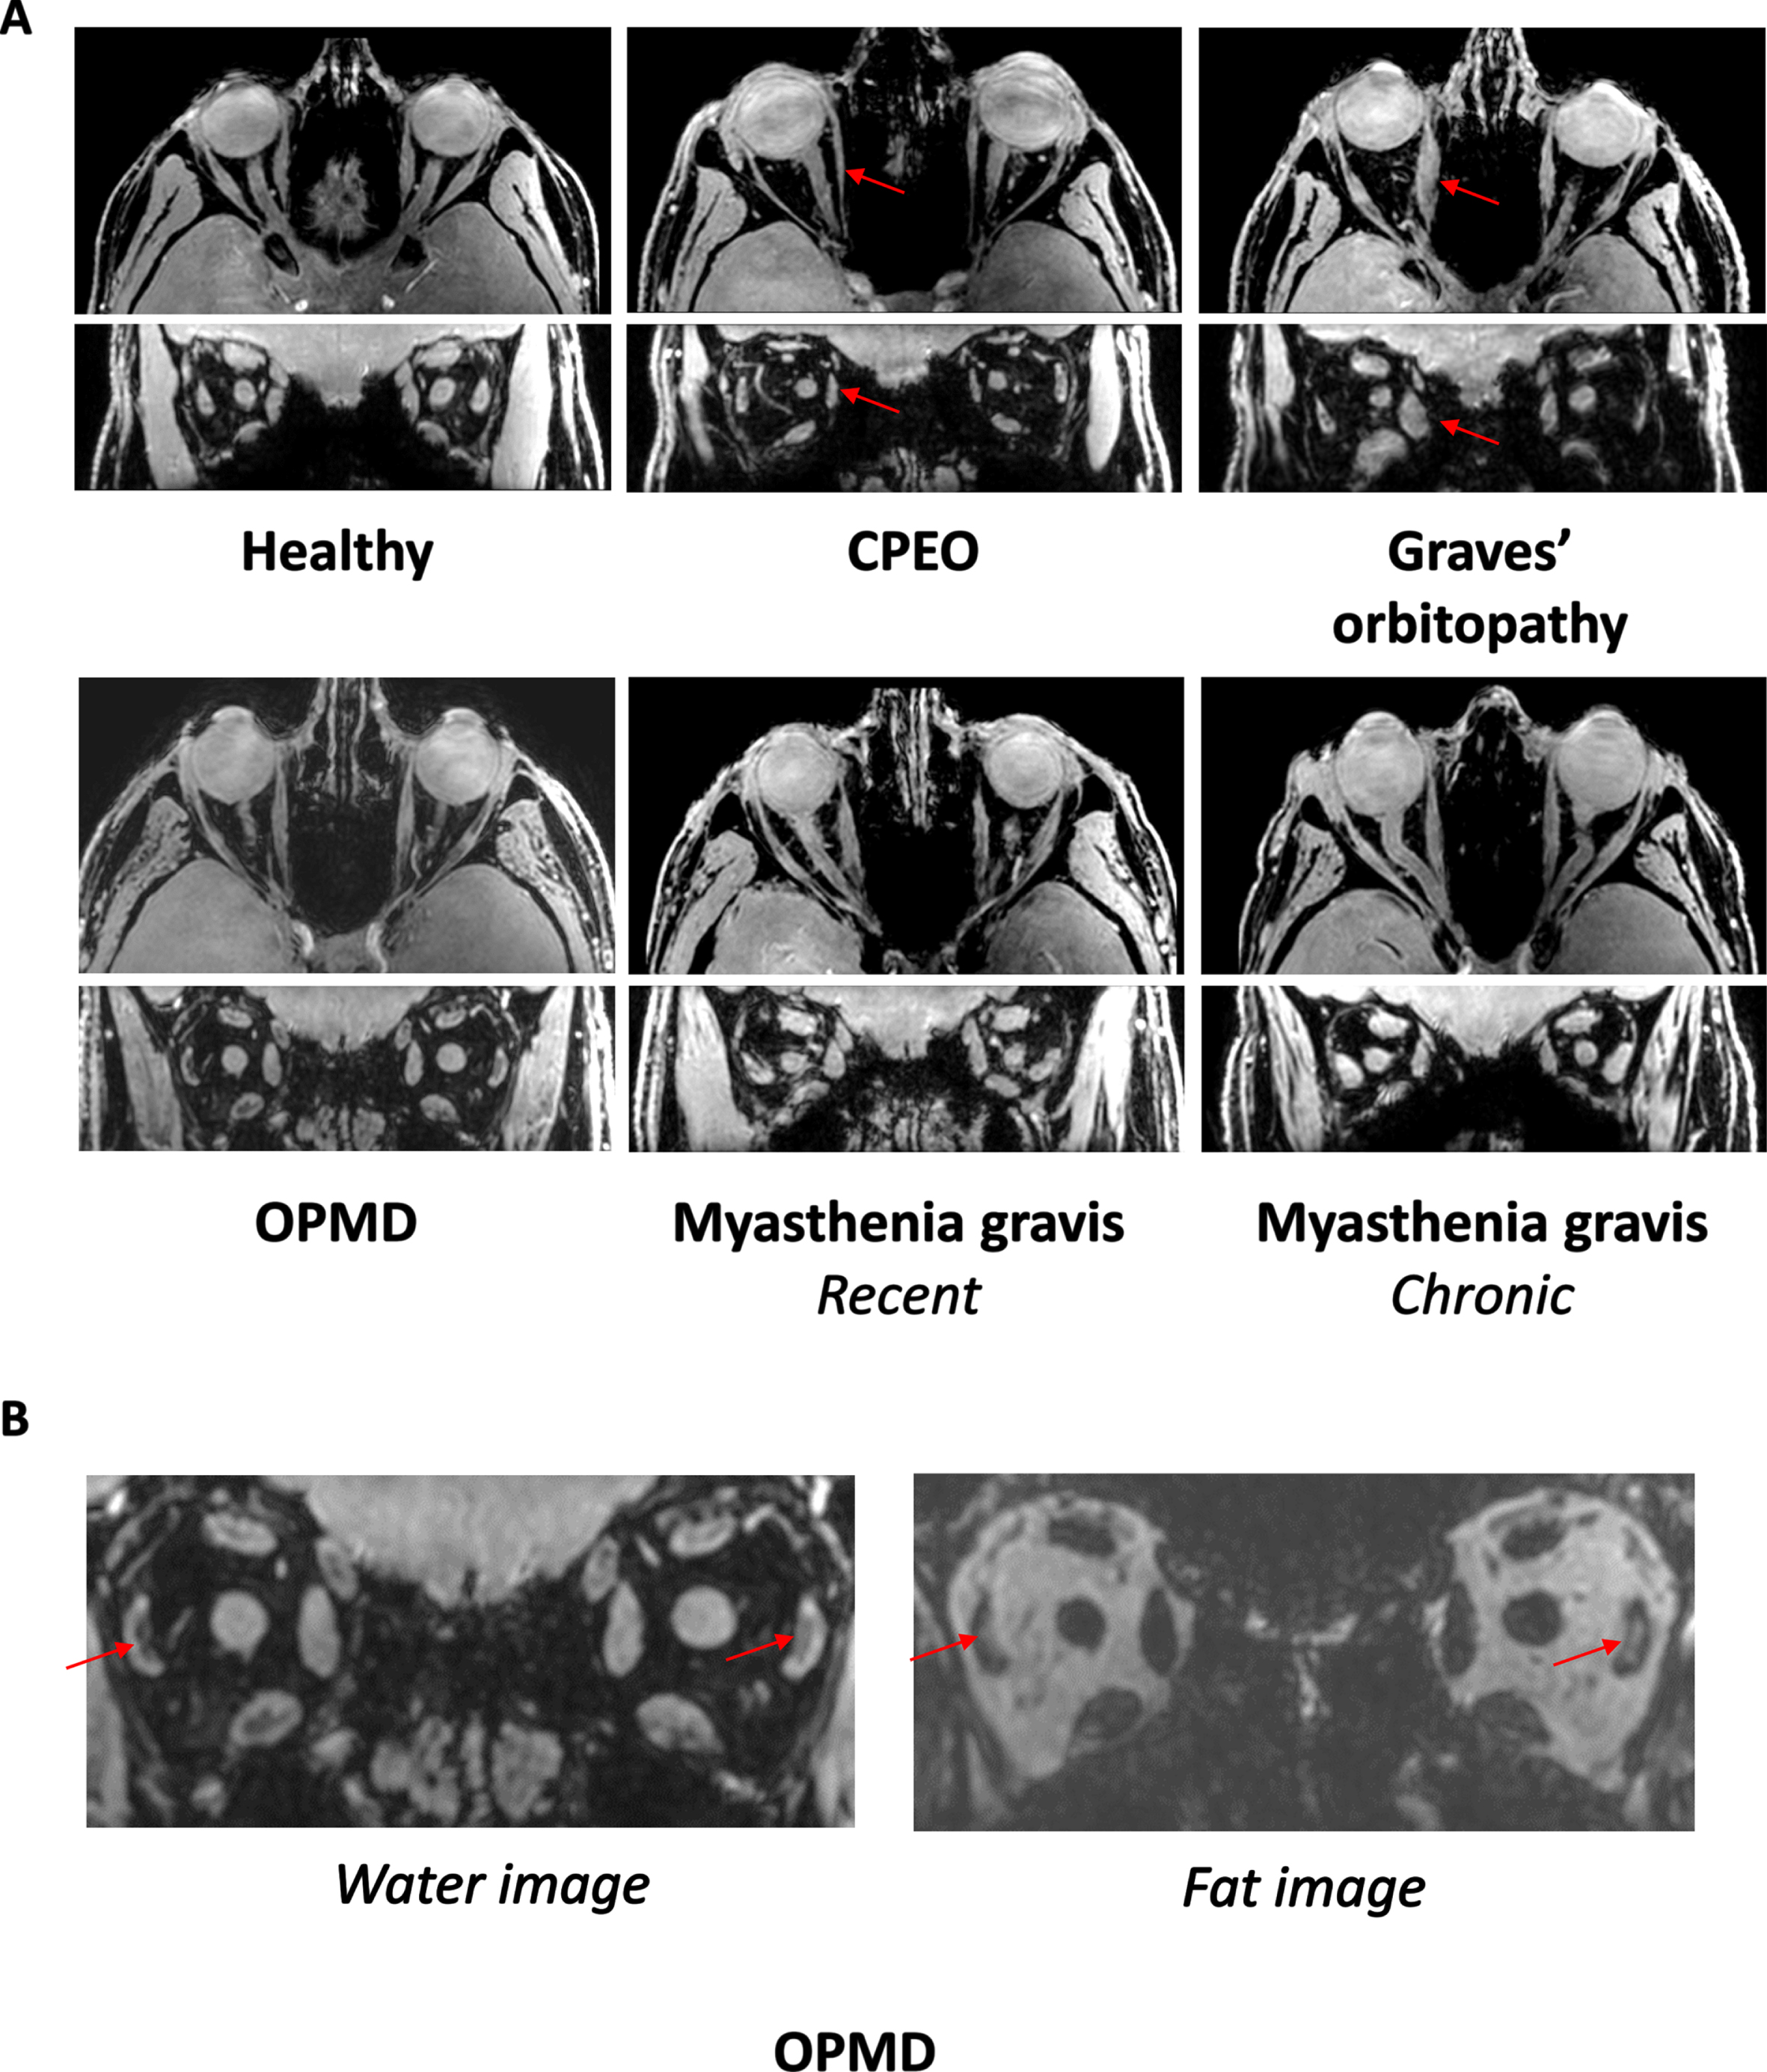 A. MRI scans from the orbit showing the extra-ocular muscles in a healthy control, a chronic progressive external orbitopathy (CPEO) patient, a Graves’ orbitopathy patient, an oculopharyngeal muscular dystrophy (OPMD) patient, a recent myasthenia gravis patient and a chronic myasthenia gravis patient. The axial and coronal water images are shown from a chemical shift based water-fat separation gradient echo scan, a technique to separately image and quantify water and fat. The red arrows indicate the atrophic medial rectus muscle in the CPEO patient and the swollen medial rectus muscle in the Graves’ orbitopathy patient. B. Example of fat replacement of the lateral rectus muscles in an OPMD patient as depicted by the red arrows. On the left the coronal water image and on the right the coronal fat image are shown.